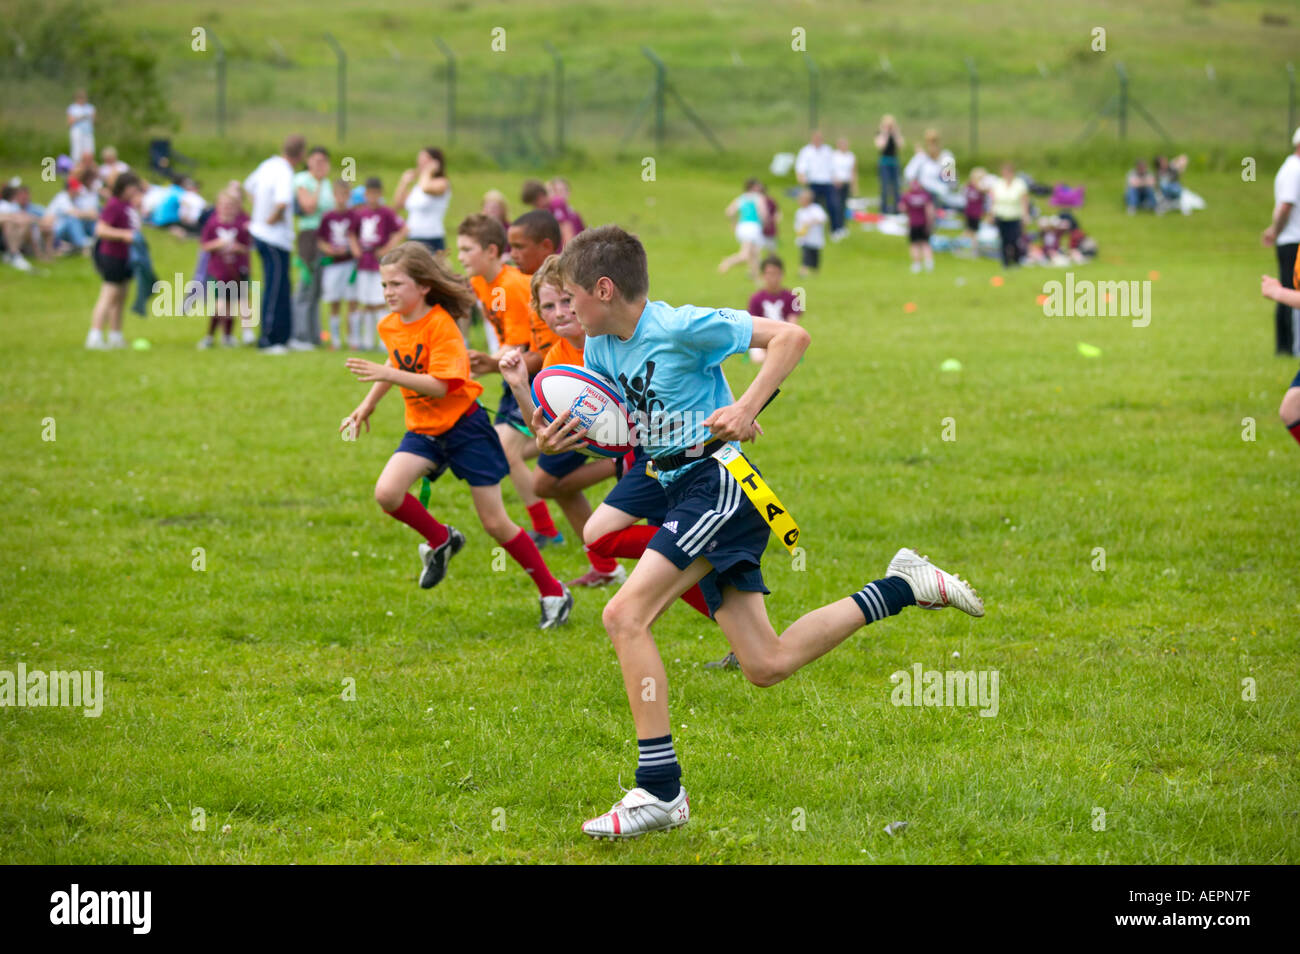 youngsters playing rugby football at sports day event Stock Photo